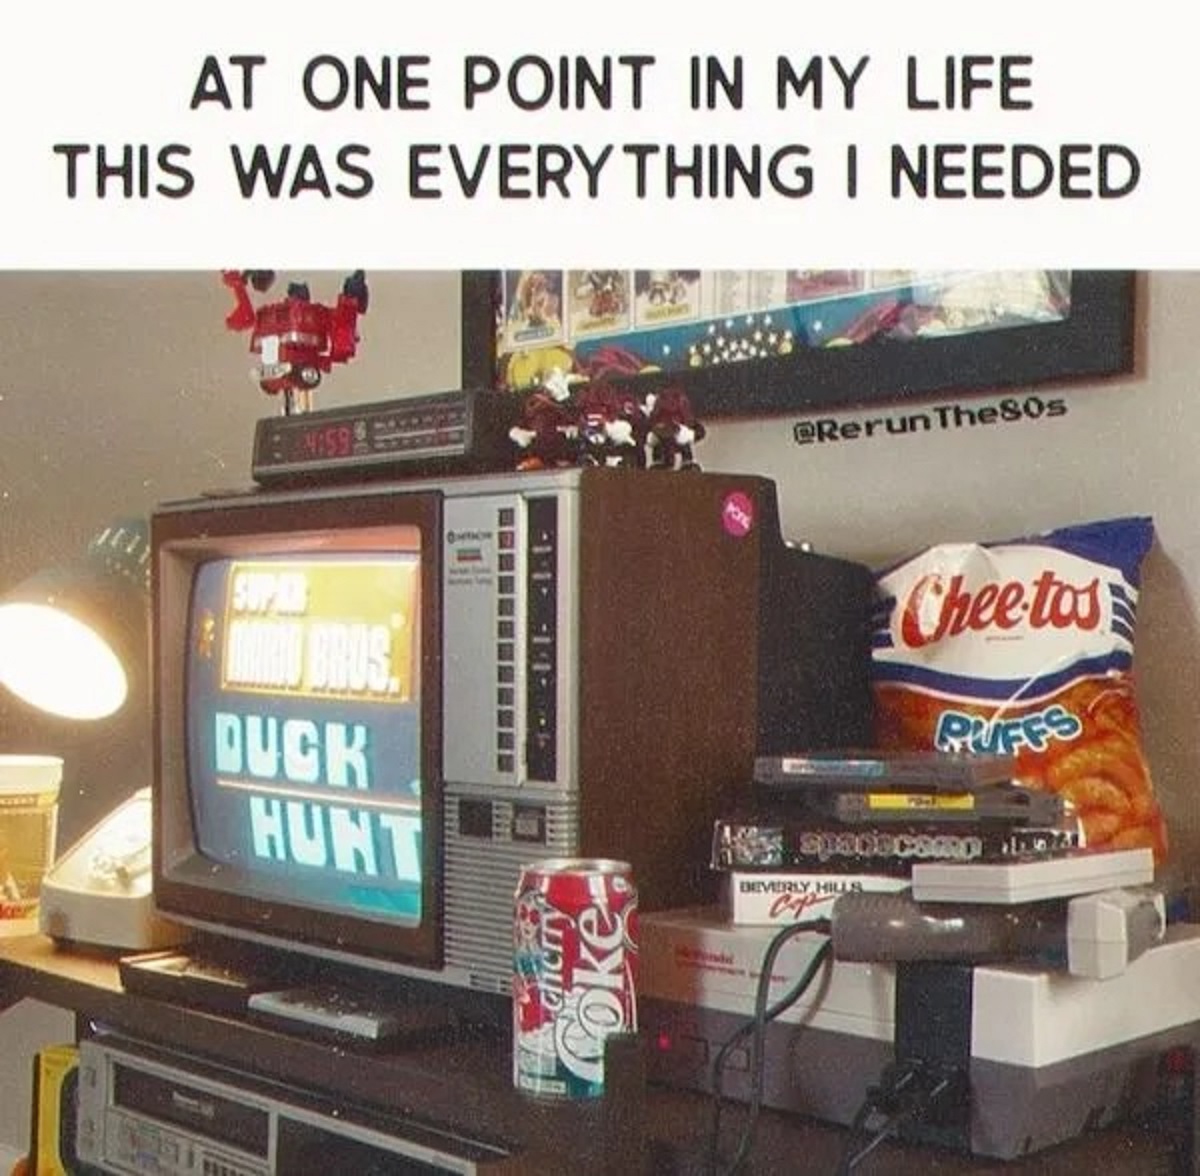 television set - At One Point In My Life This Was Everything I Needed Duck Hunt 11 14 chierry Coke The80s Cheetos Ruffs Spacecamo Deverly Hills Cop